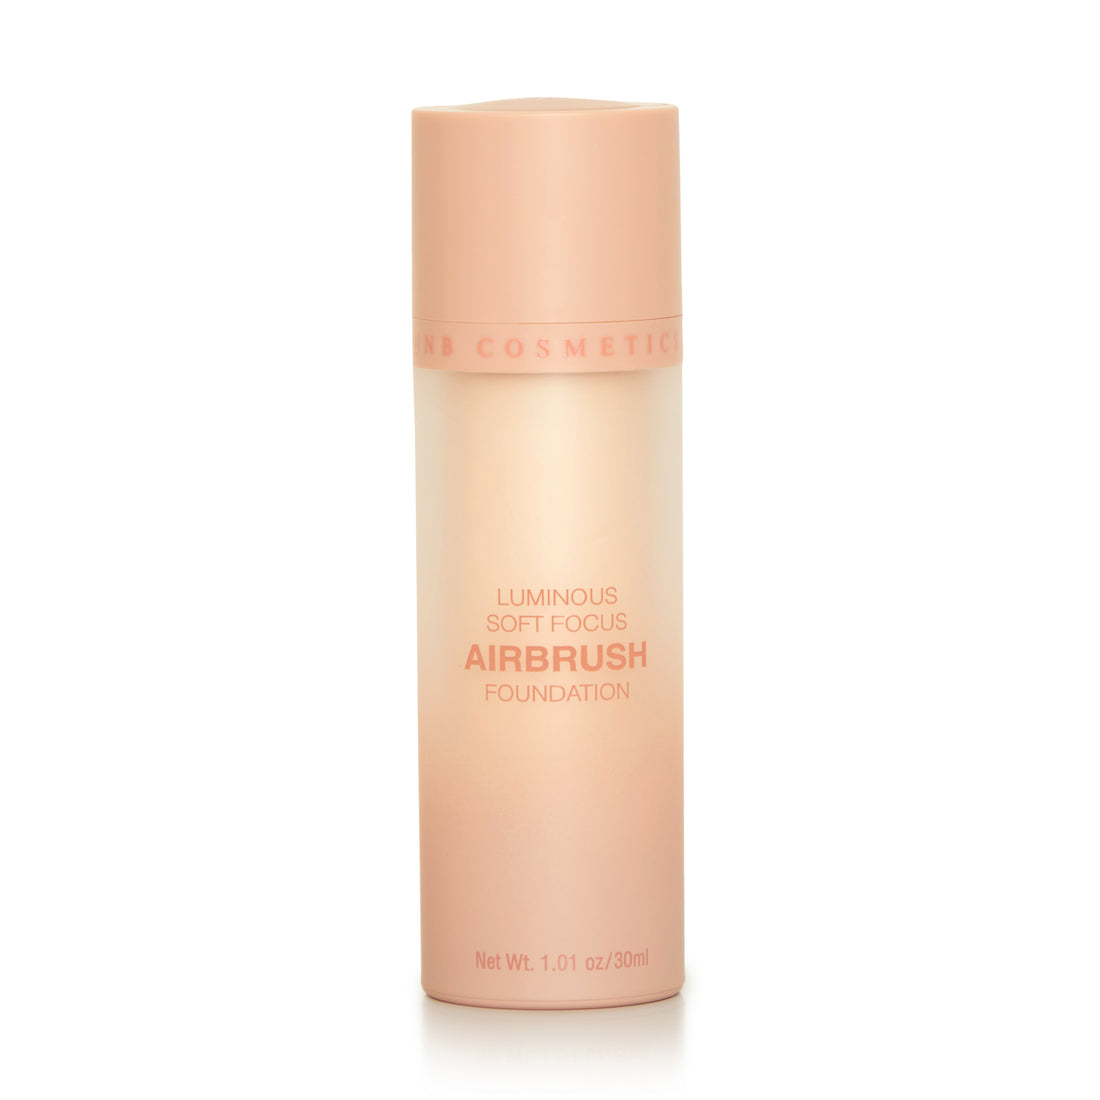 HNB Cosmetics new Luminous Soft Focus Airbrush Foundation - covers blemishes and pigmentation.